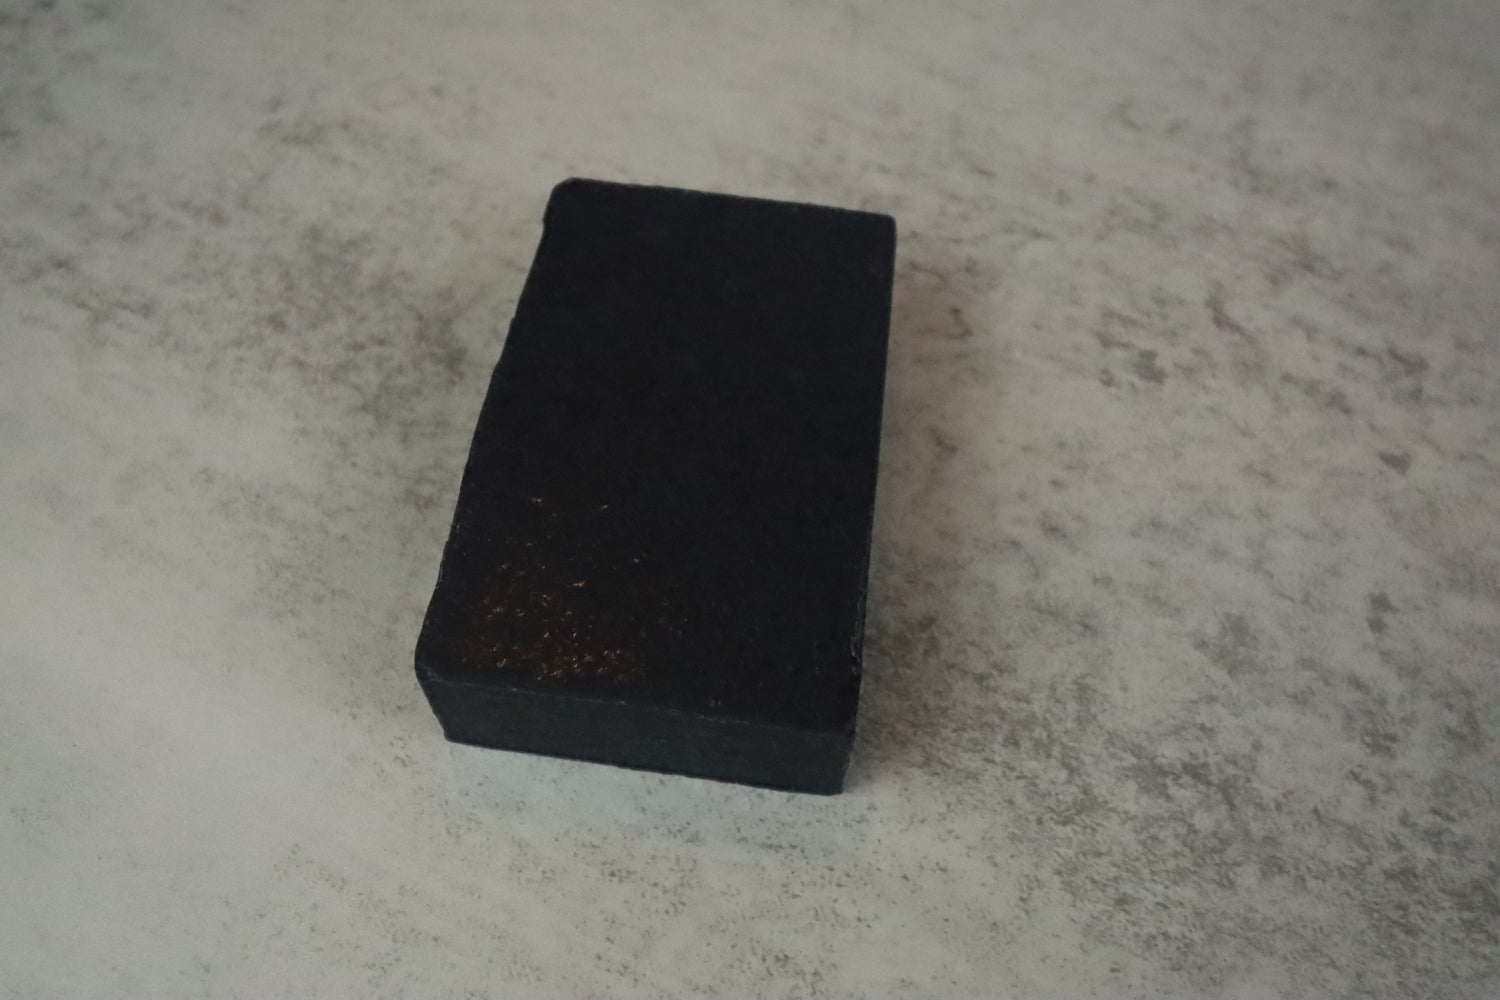 Activated charcoal used in this shea butter soap by Ca'Mora.